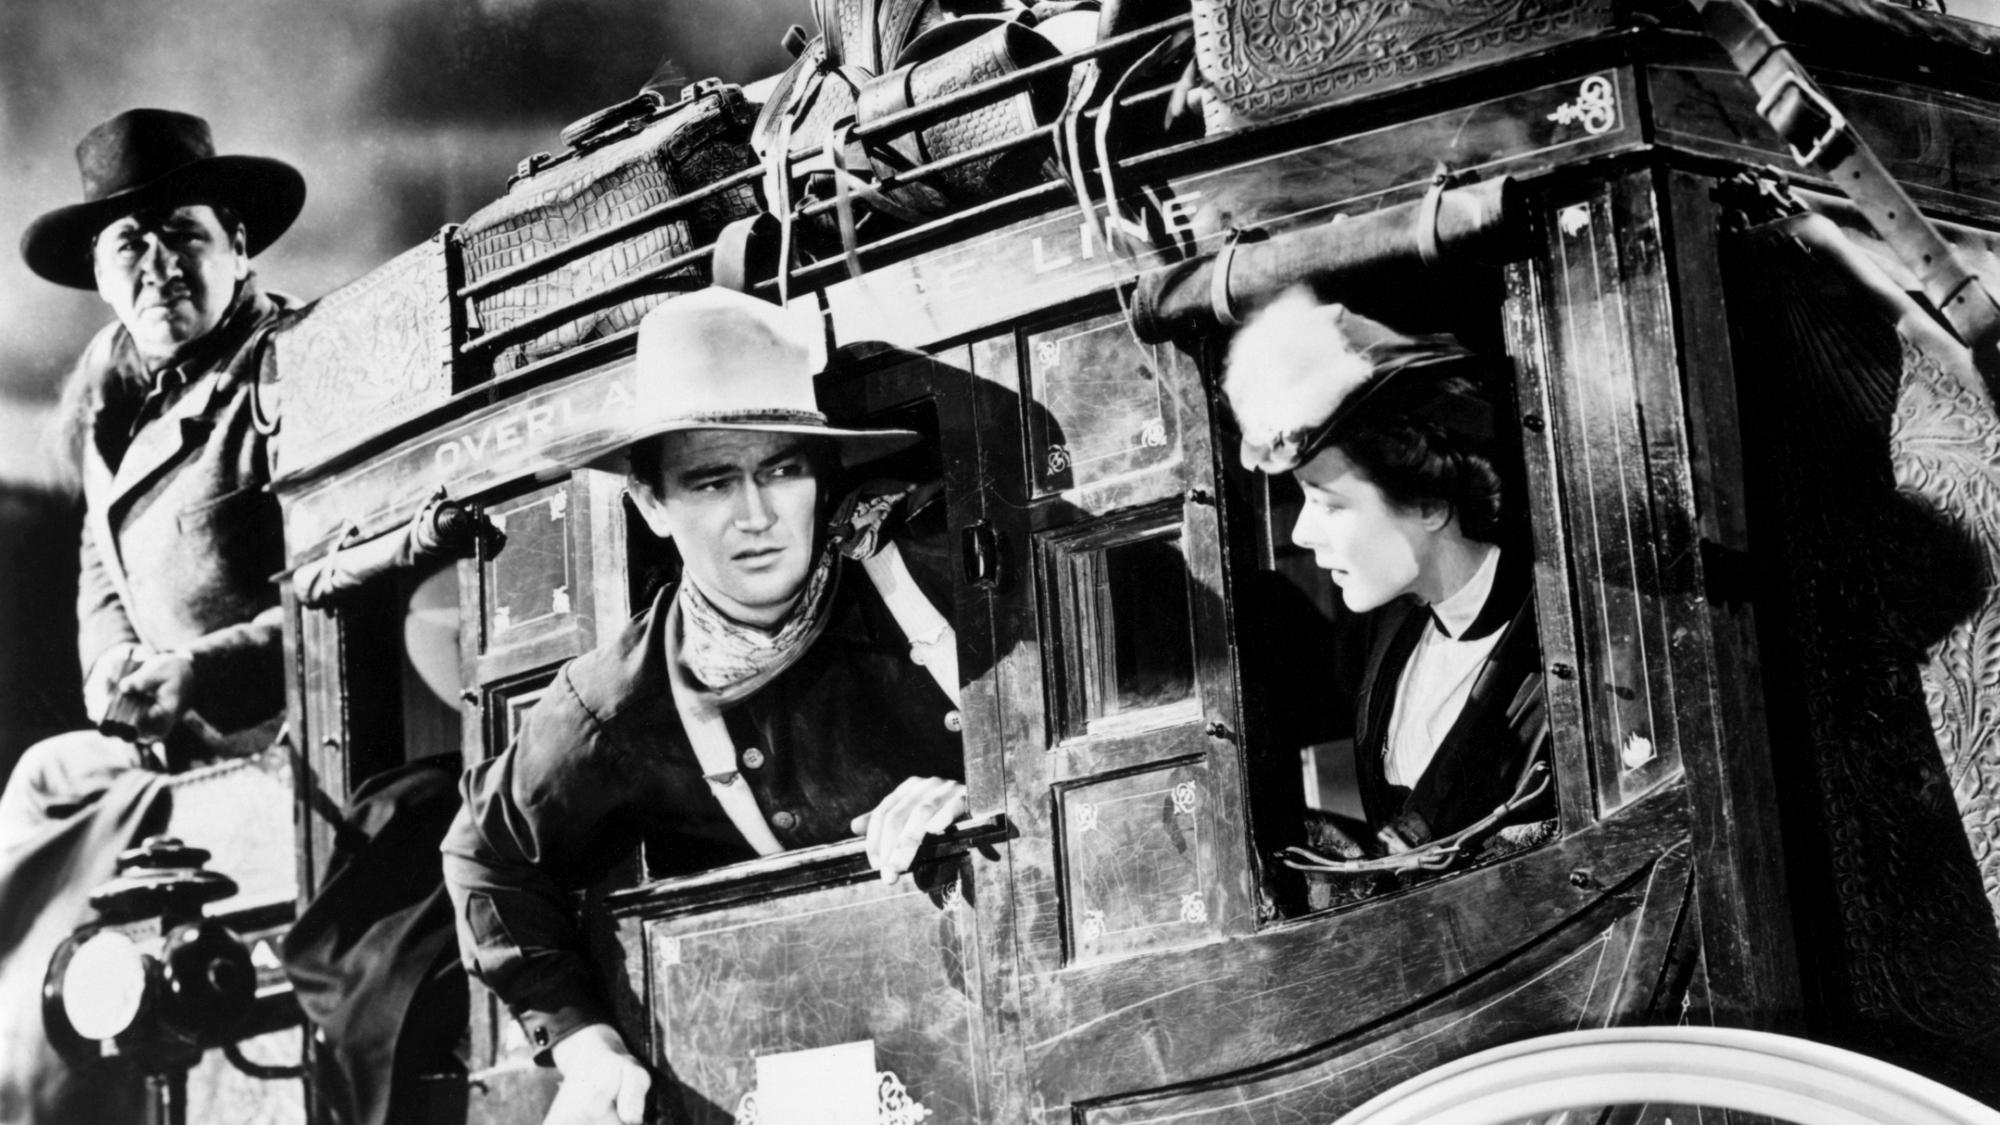 John Wayne and cast in Stagecoach (1939)